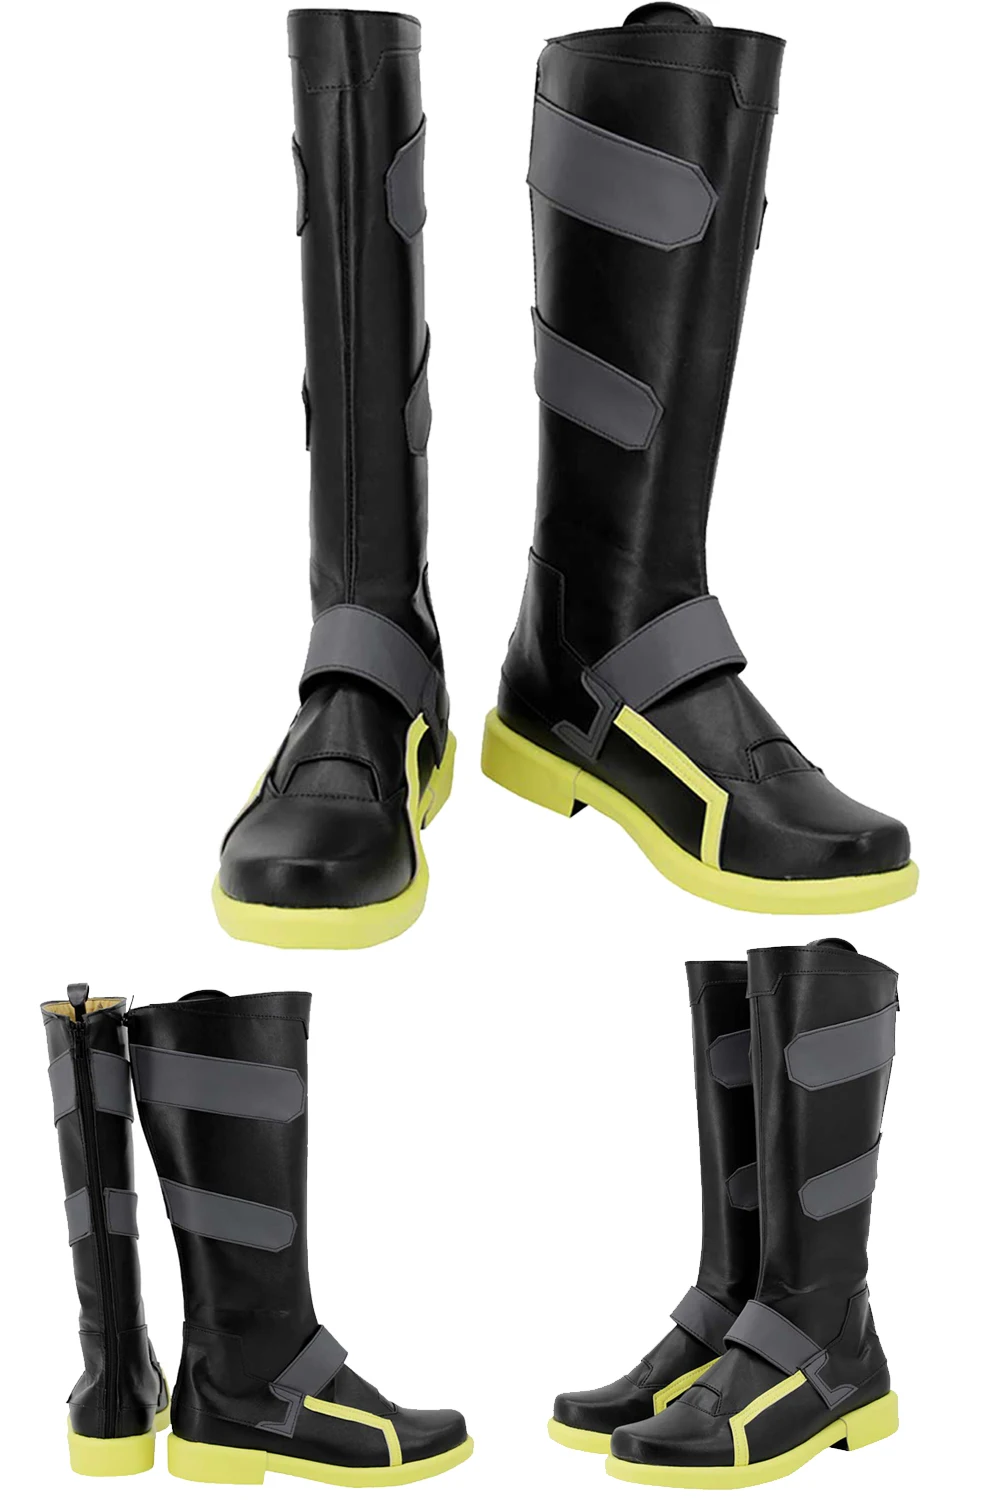 david-cosplay-role-play-shoes-edge-anime-runner-costume-accessories-long-boots-adult-men-fantasy-fancy-dress-up-party-prop